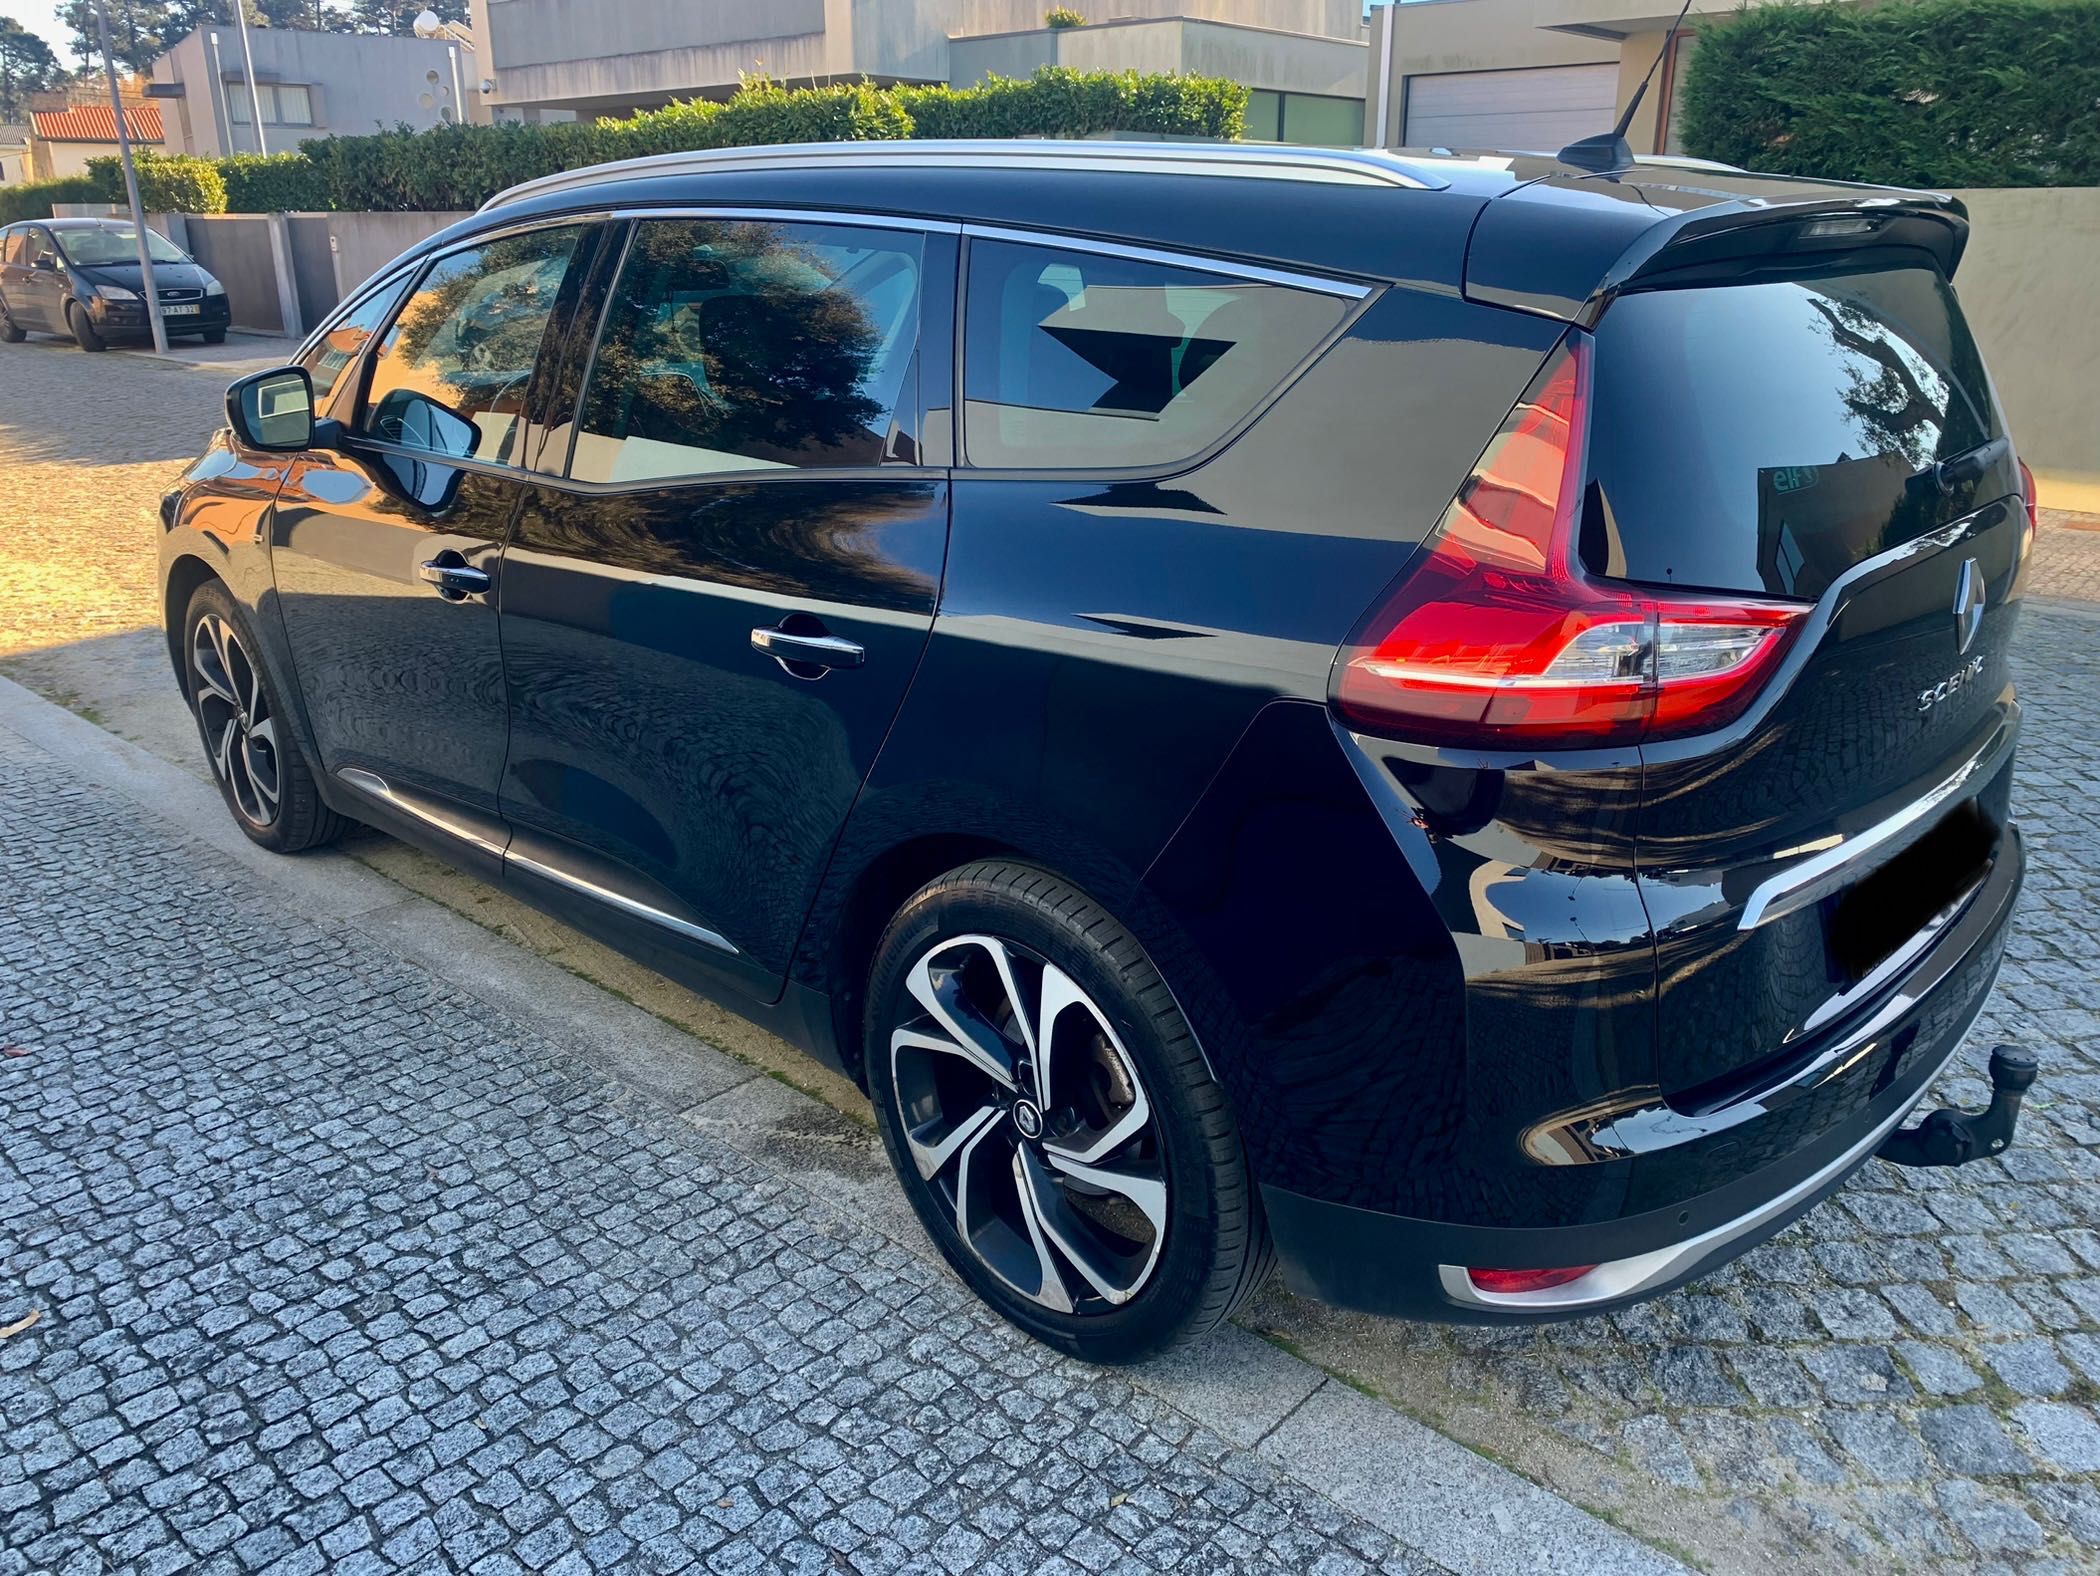 Renault Grand Scénic 1.2 DCi Bose Edition